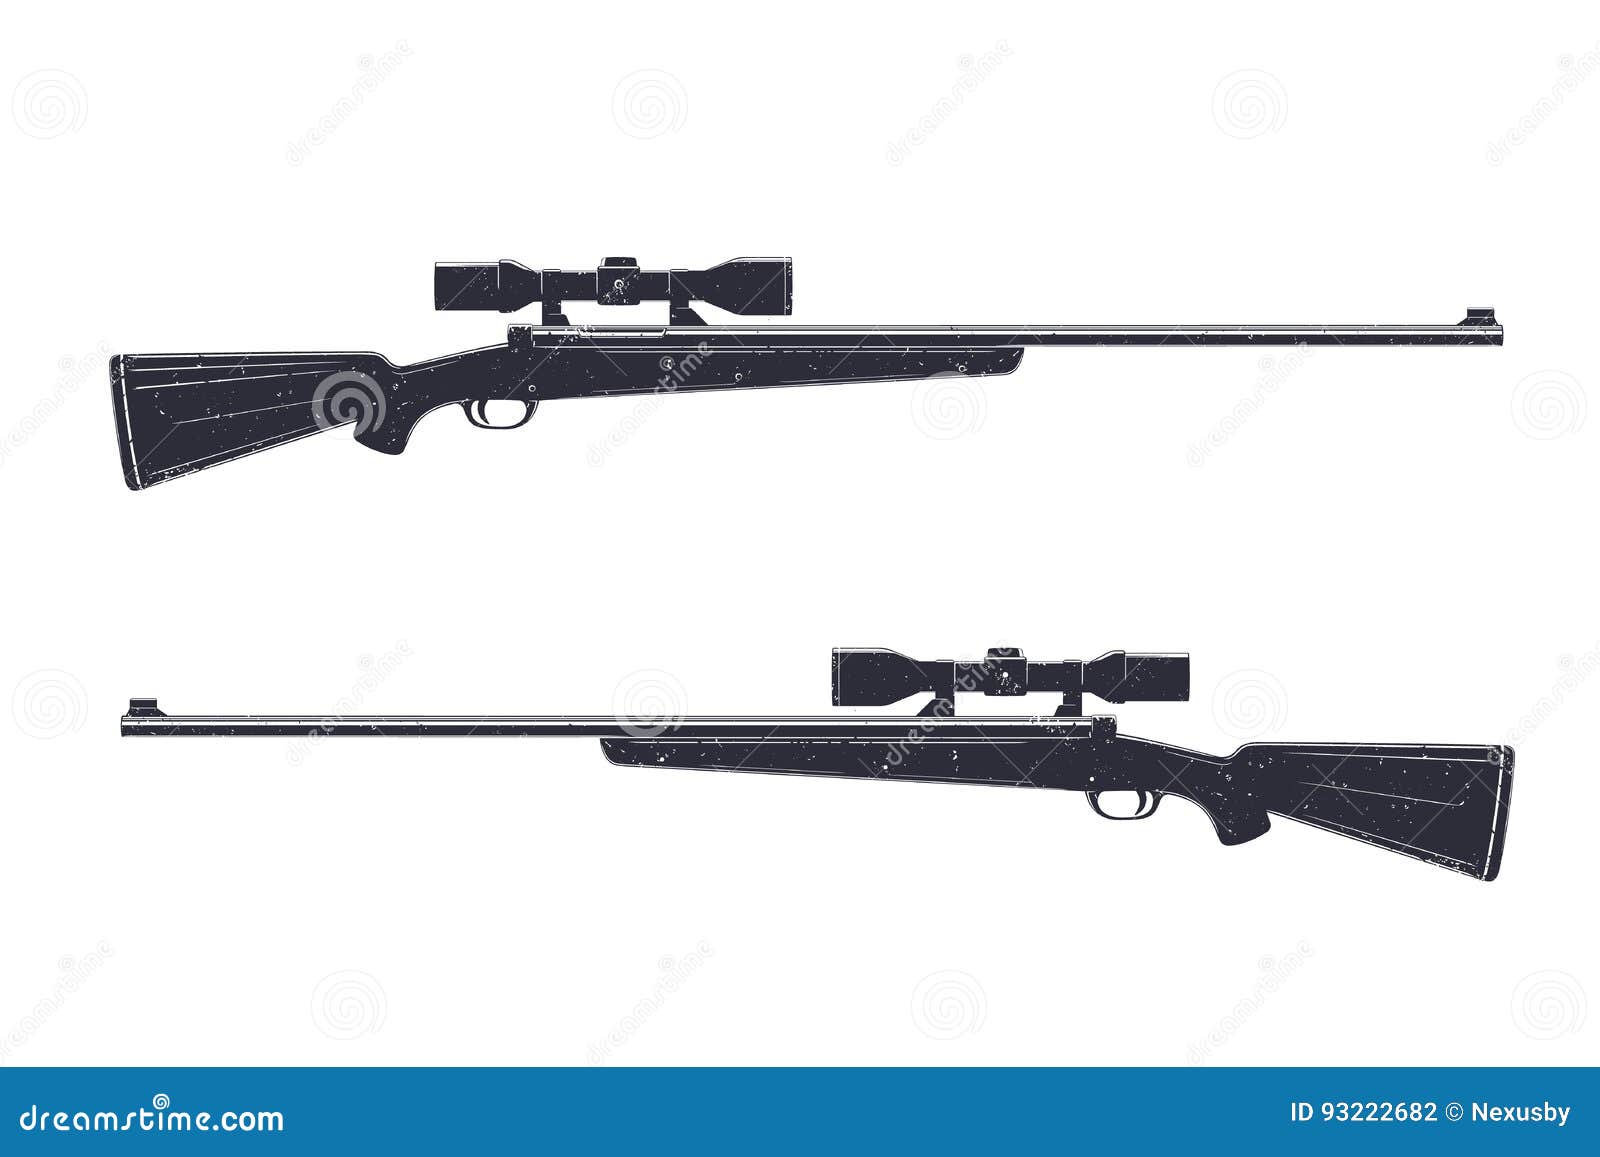 hunting rifle with optical sight, sniper rifle